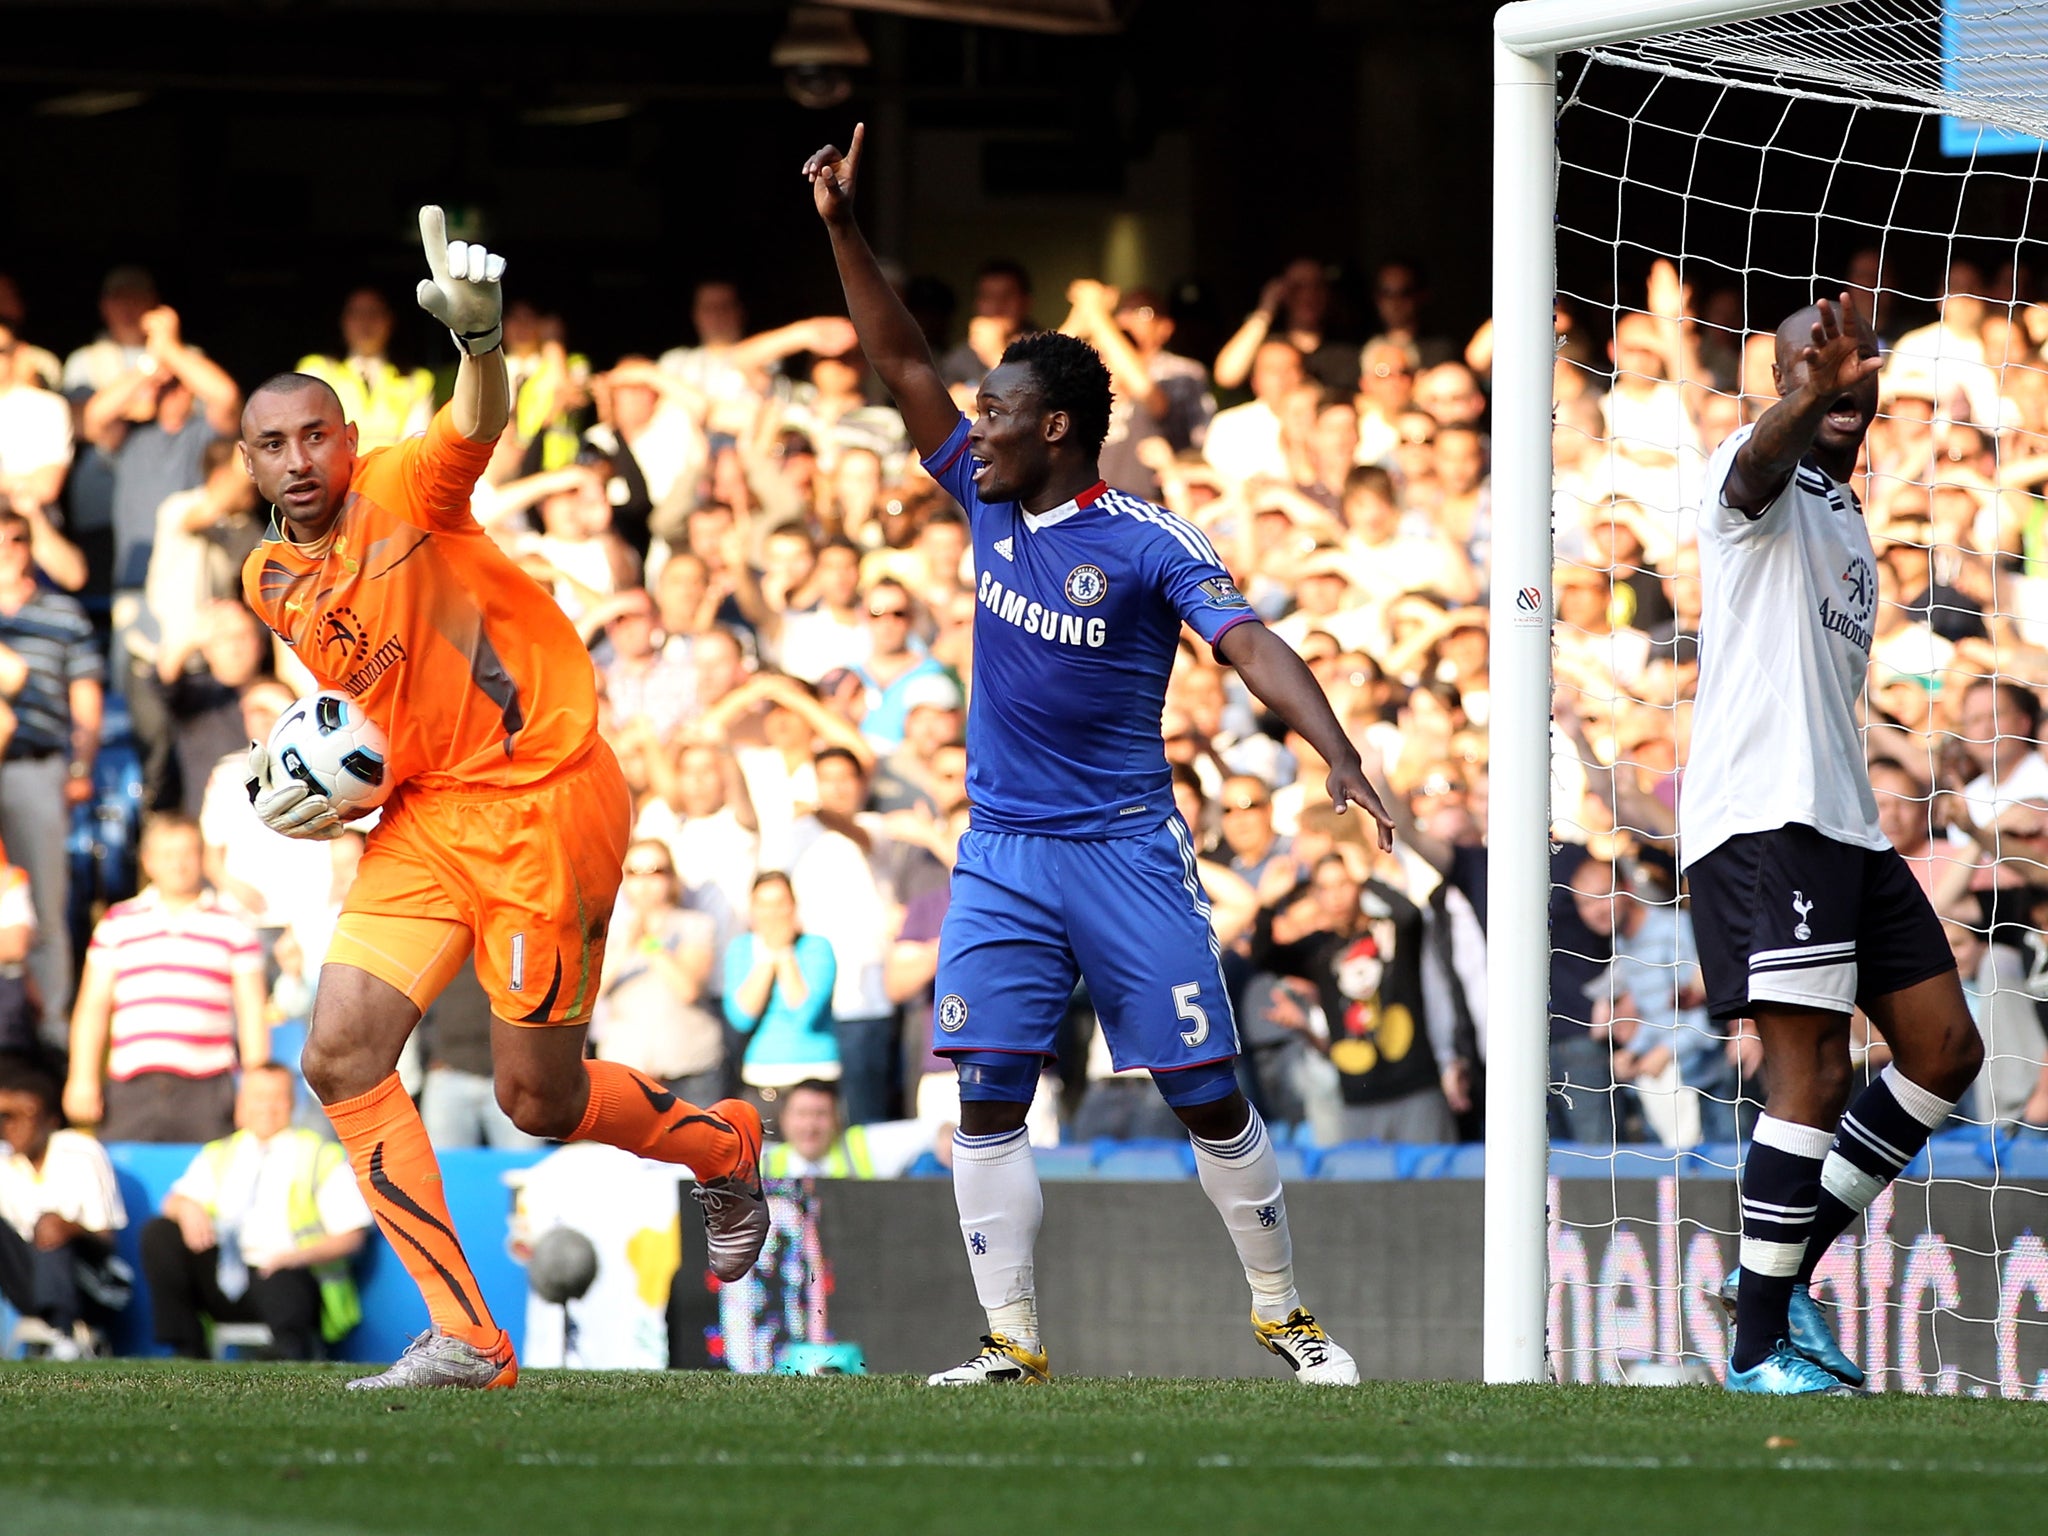 New technology should prevent 'ghost goals' like Frank Lampard's against Tottenham in 2011